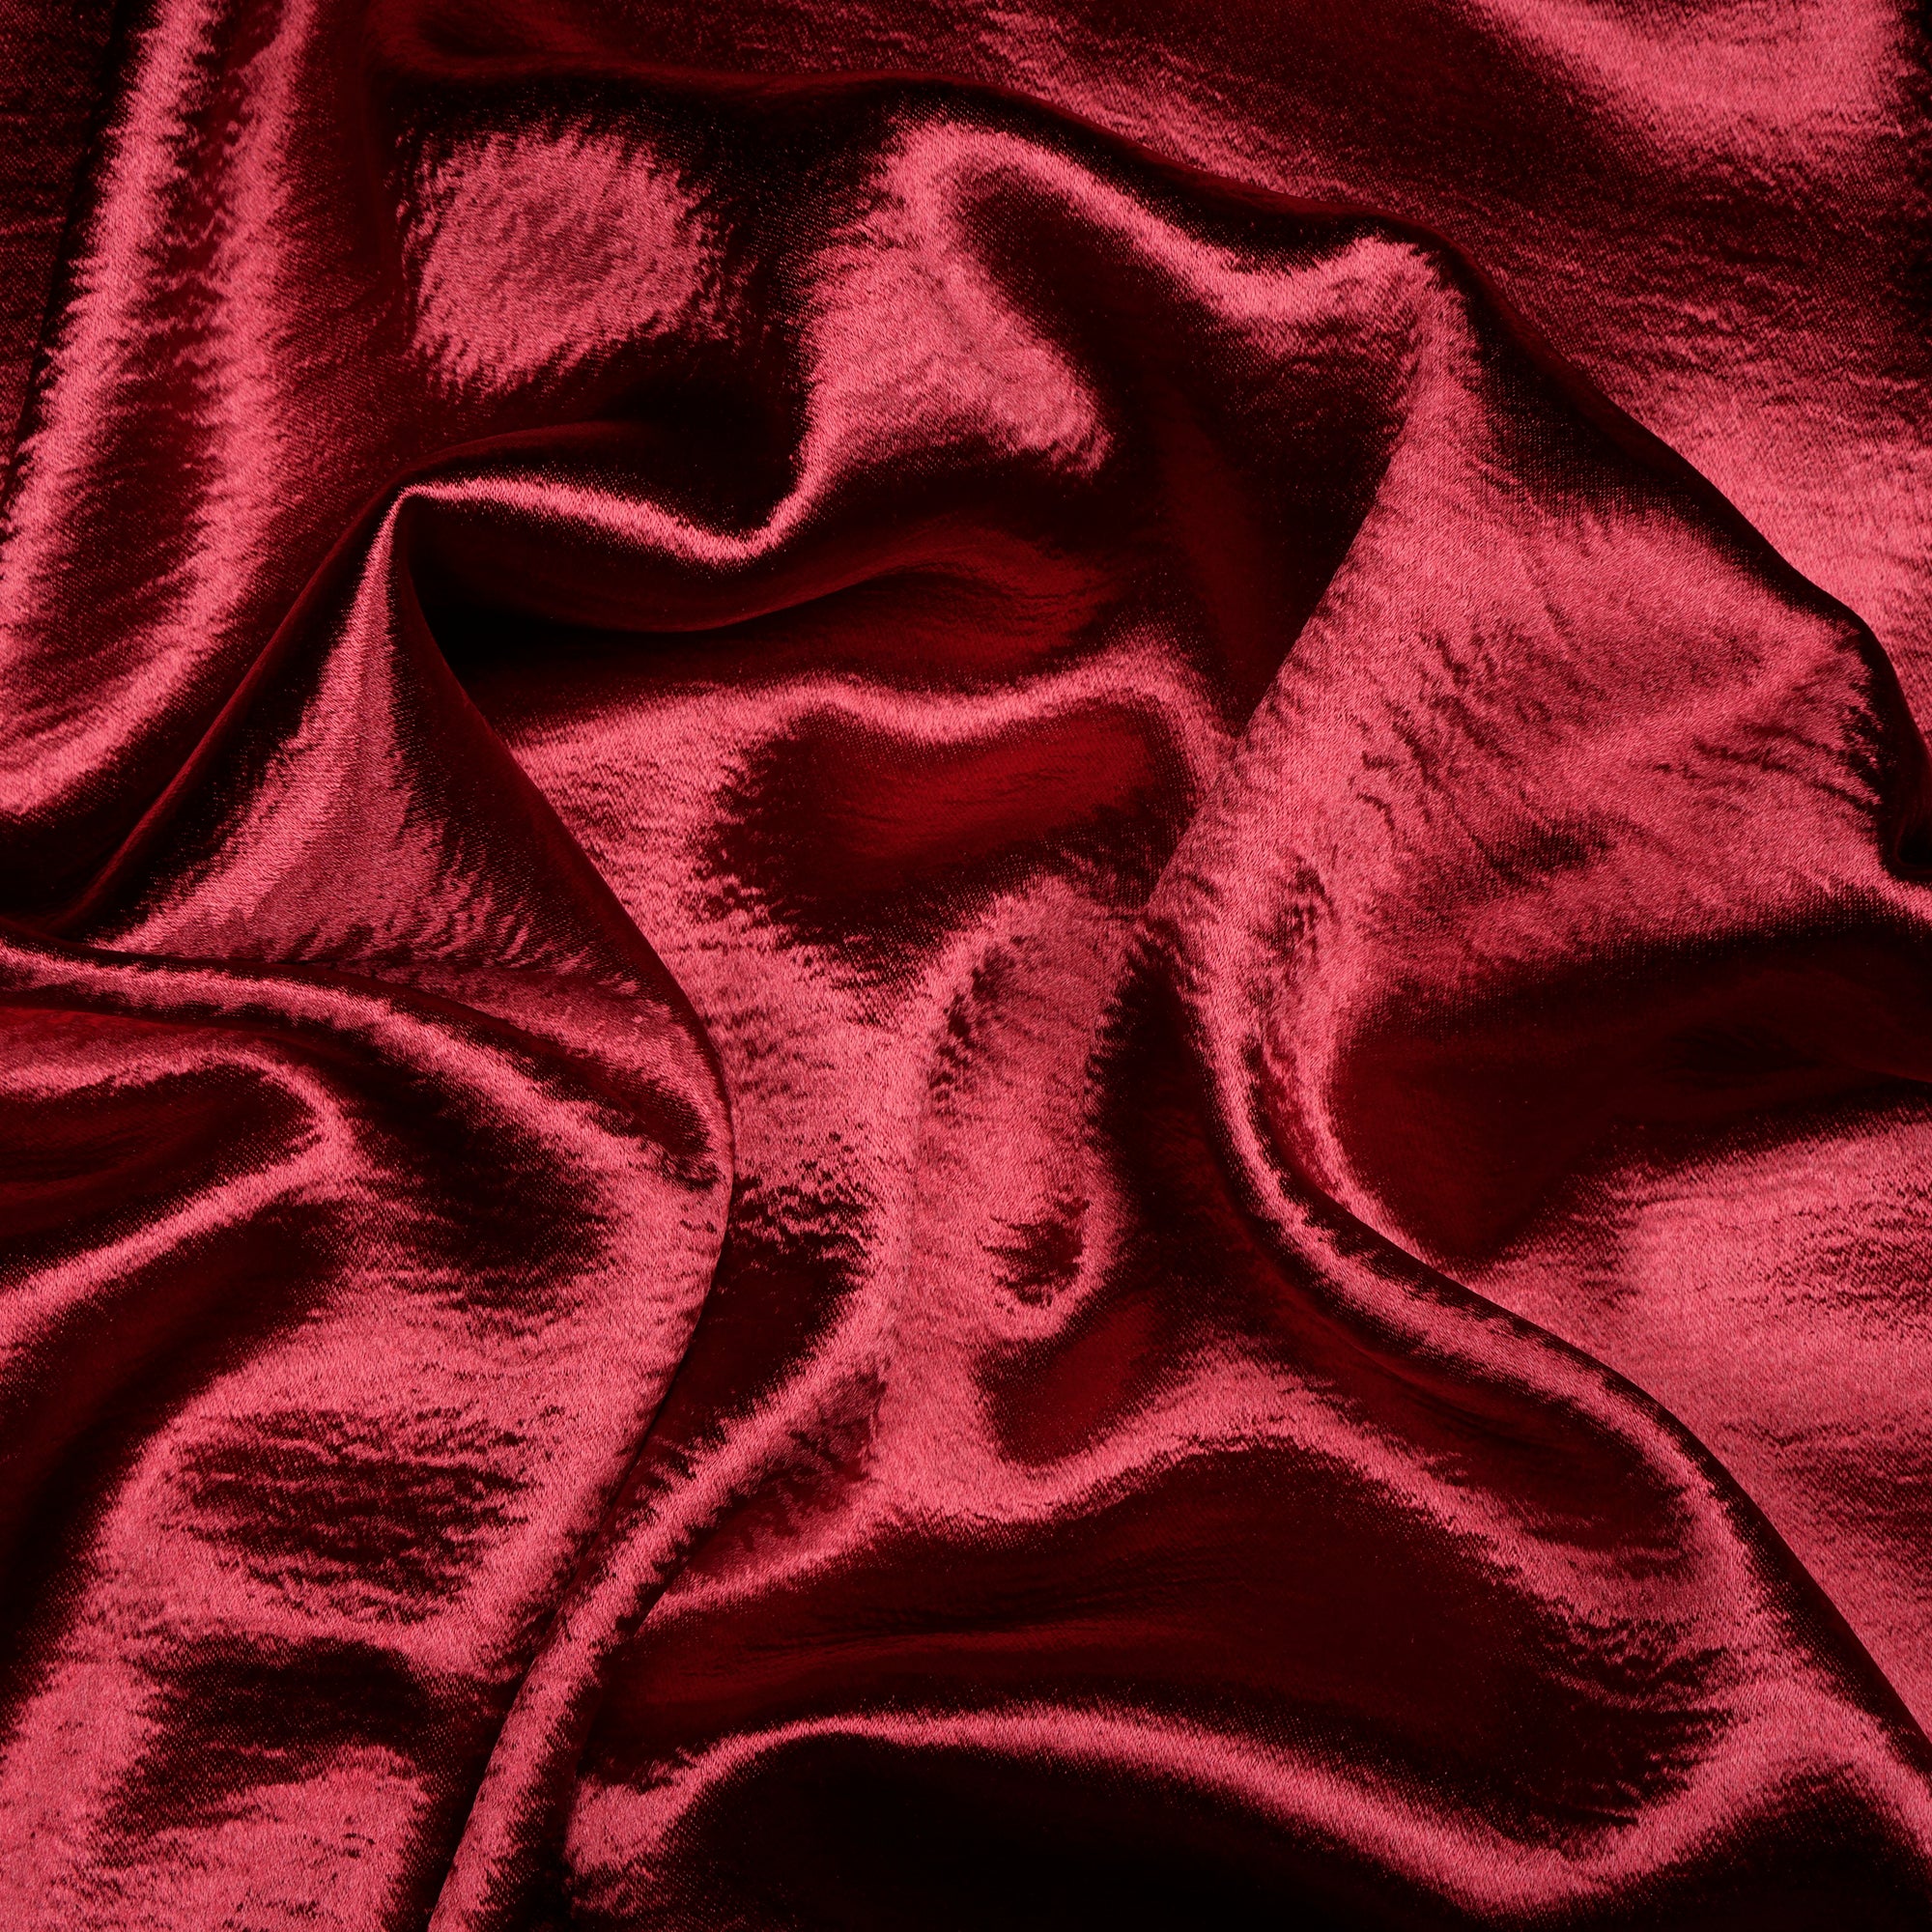 Maroon Solid Dyed Imported Lido Satin Fabric (60" Width)